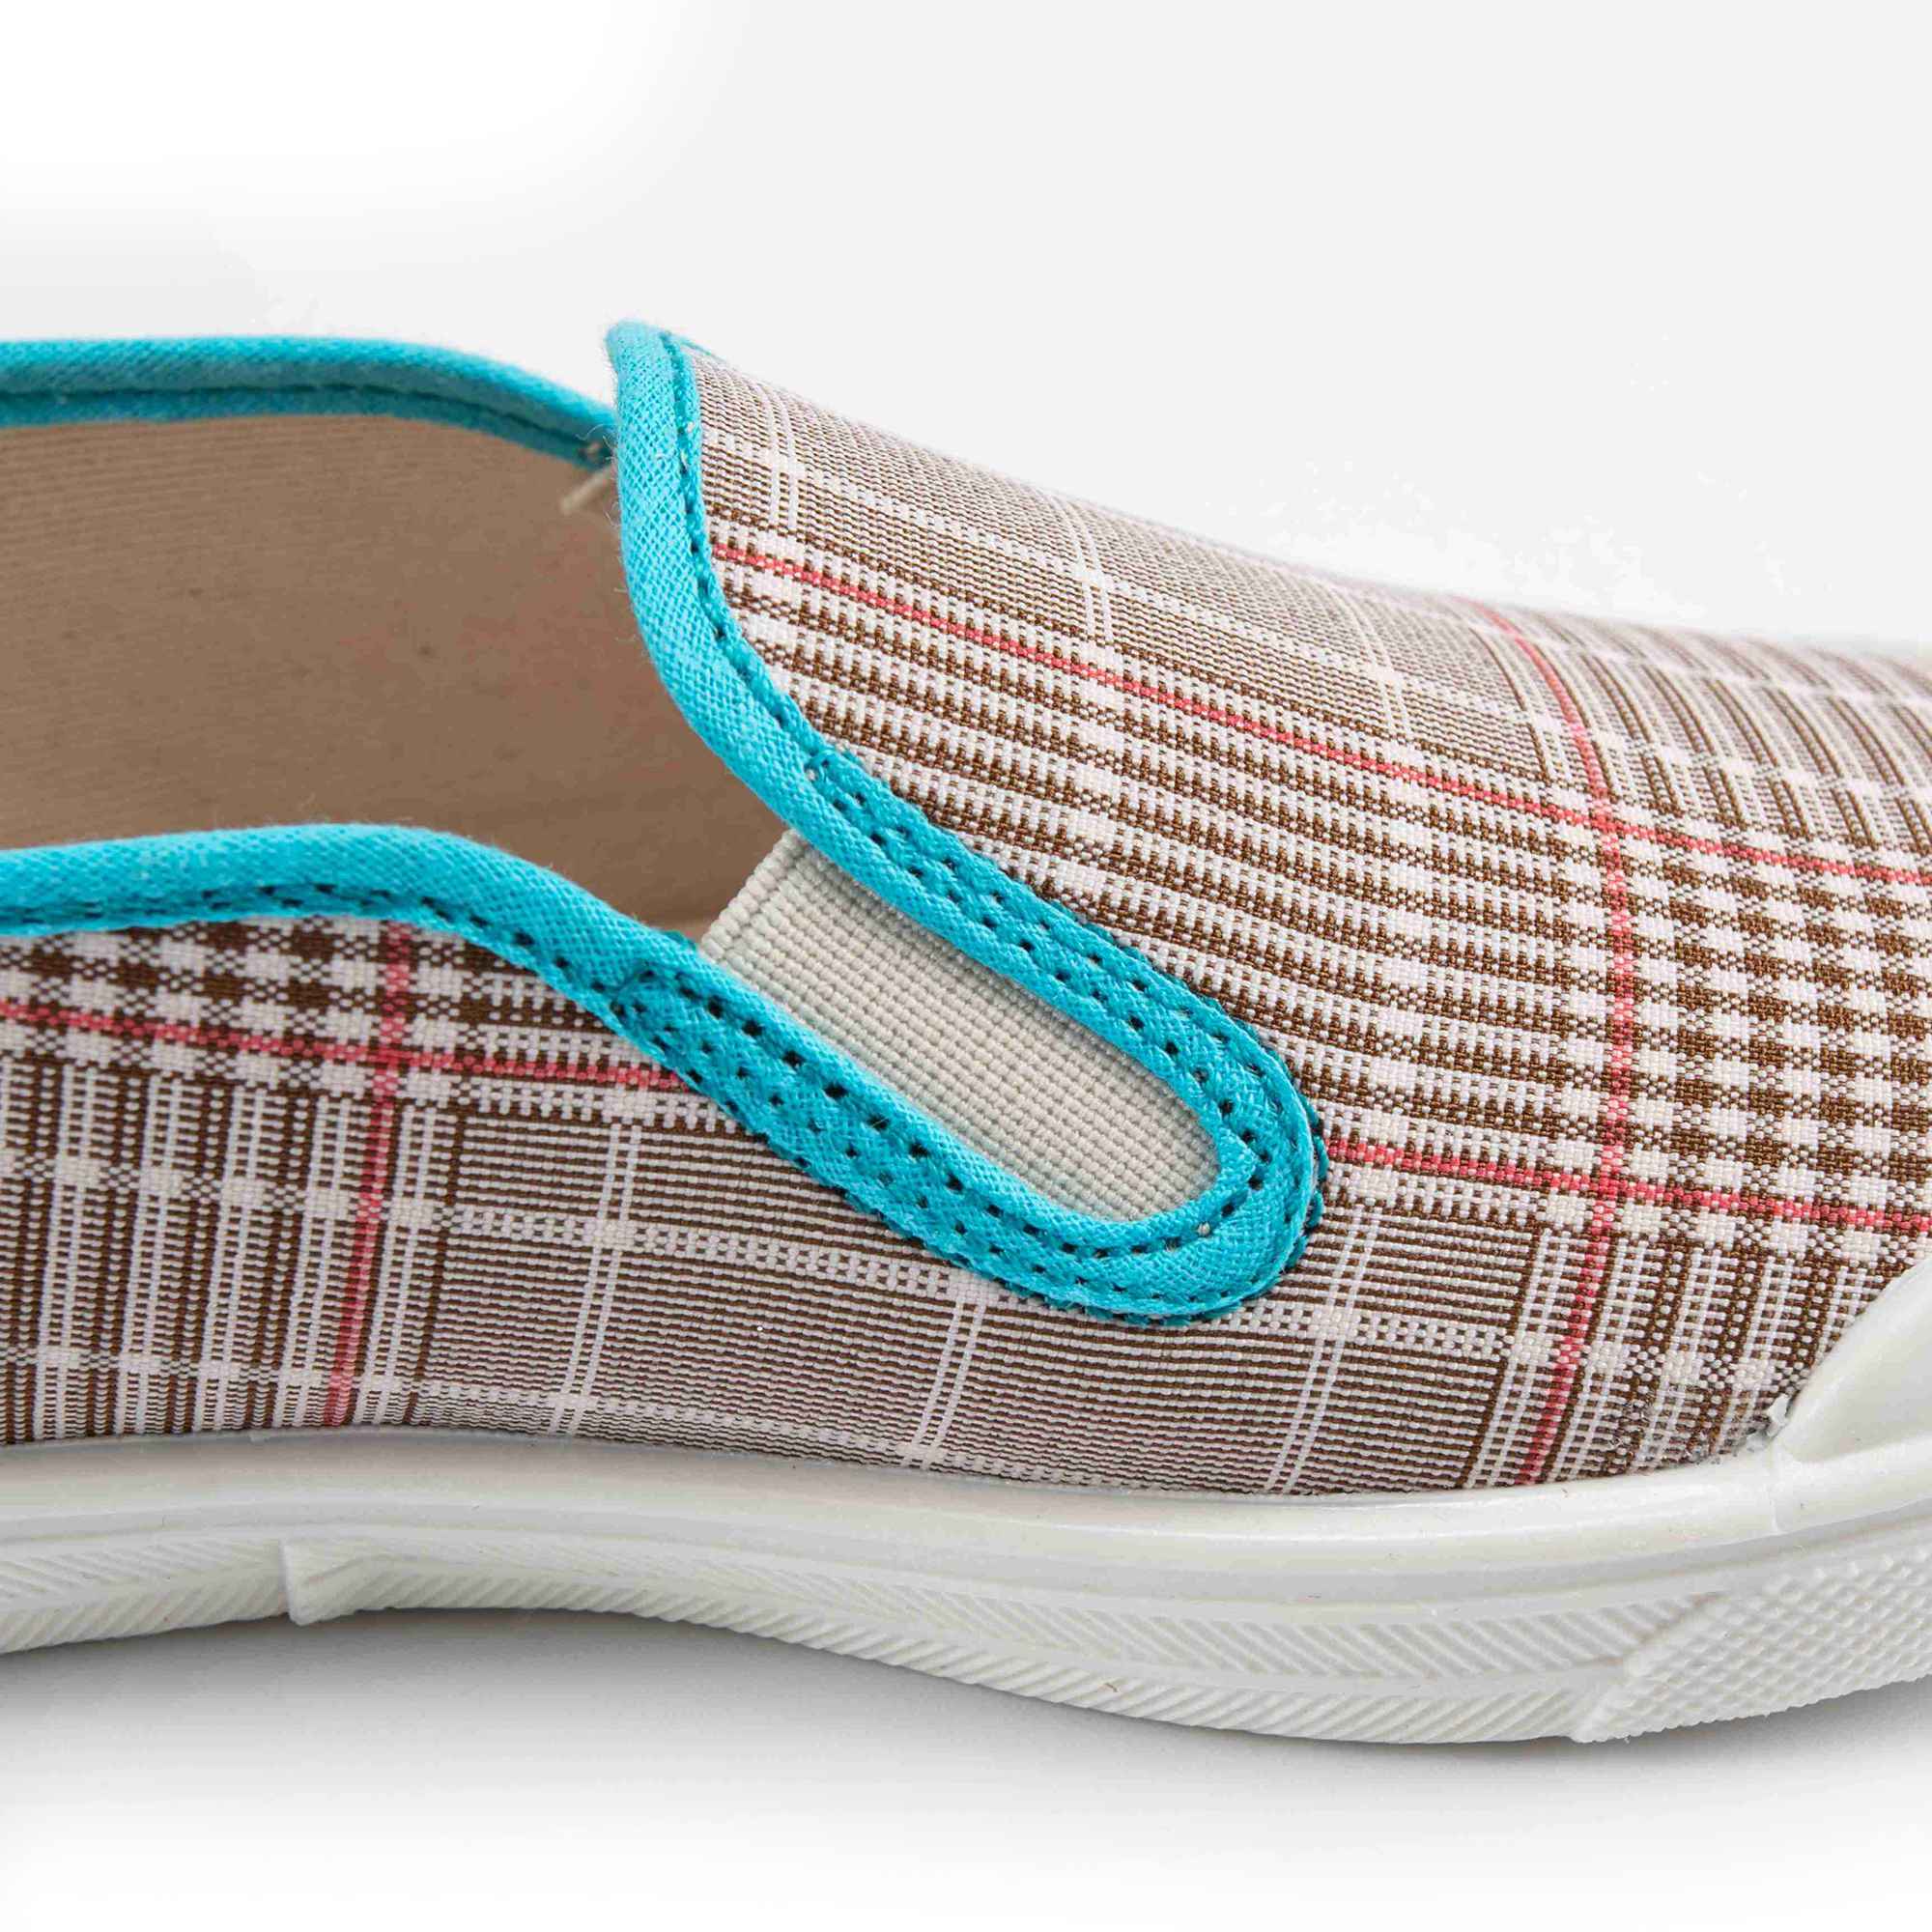 Boys & Girls Beige Check Shoes